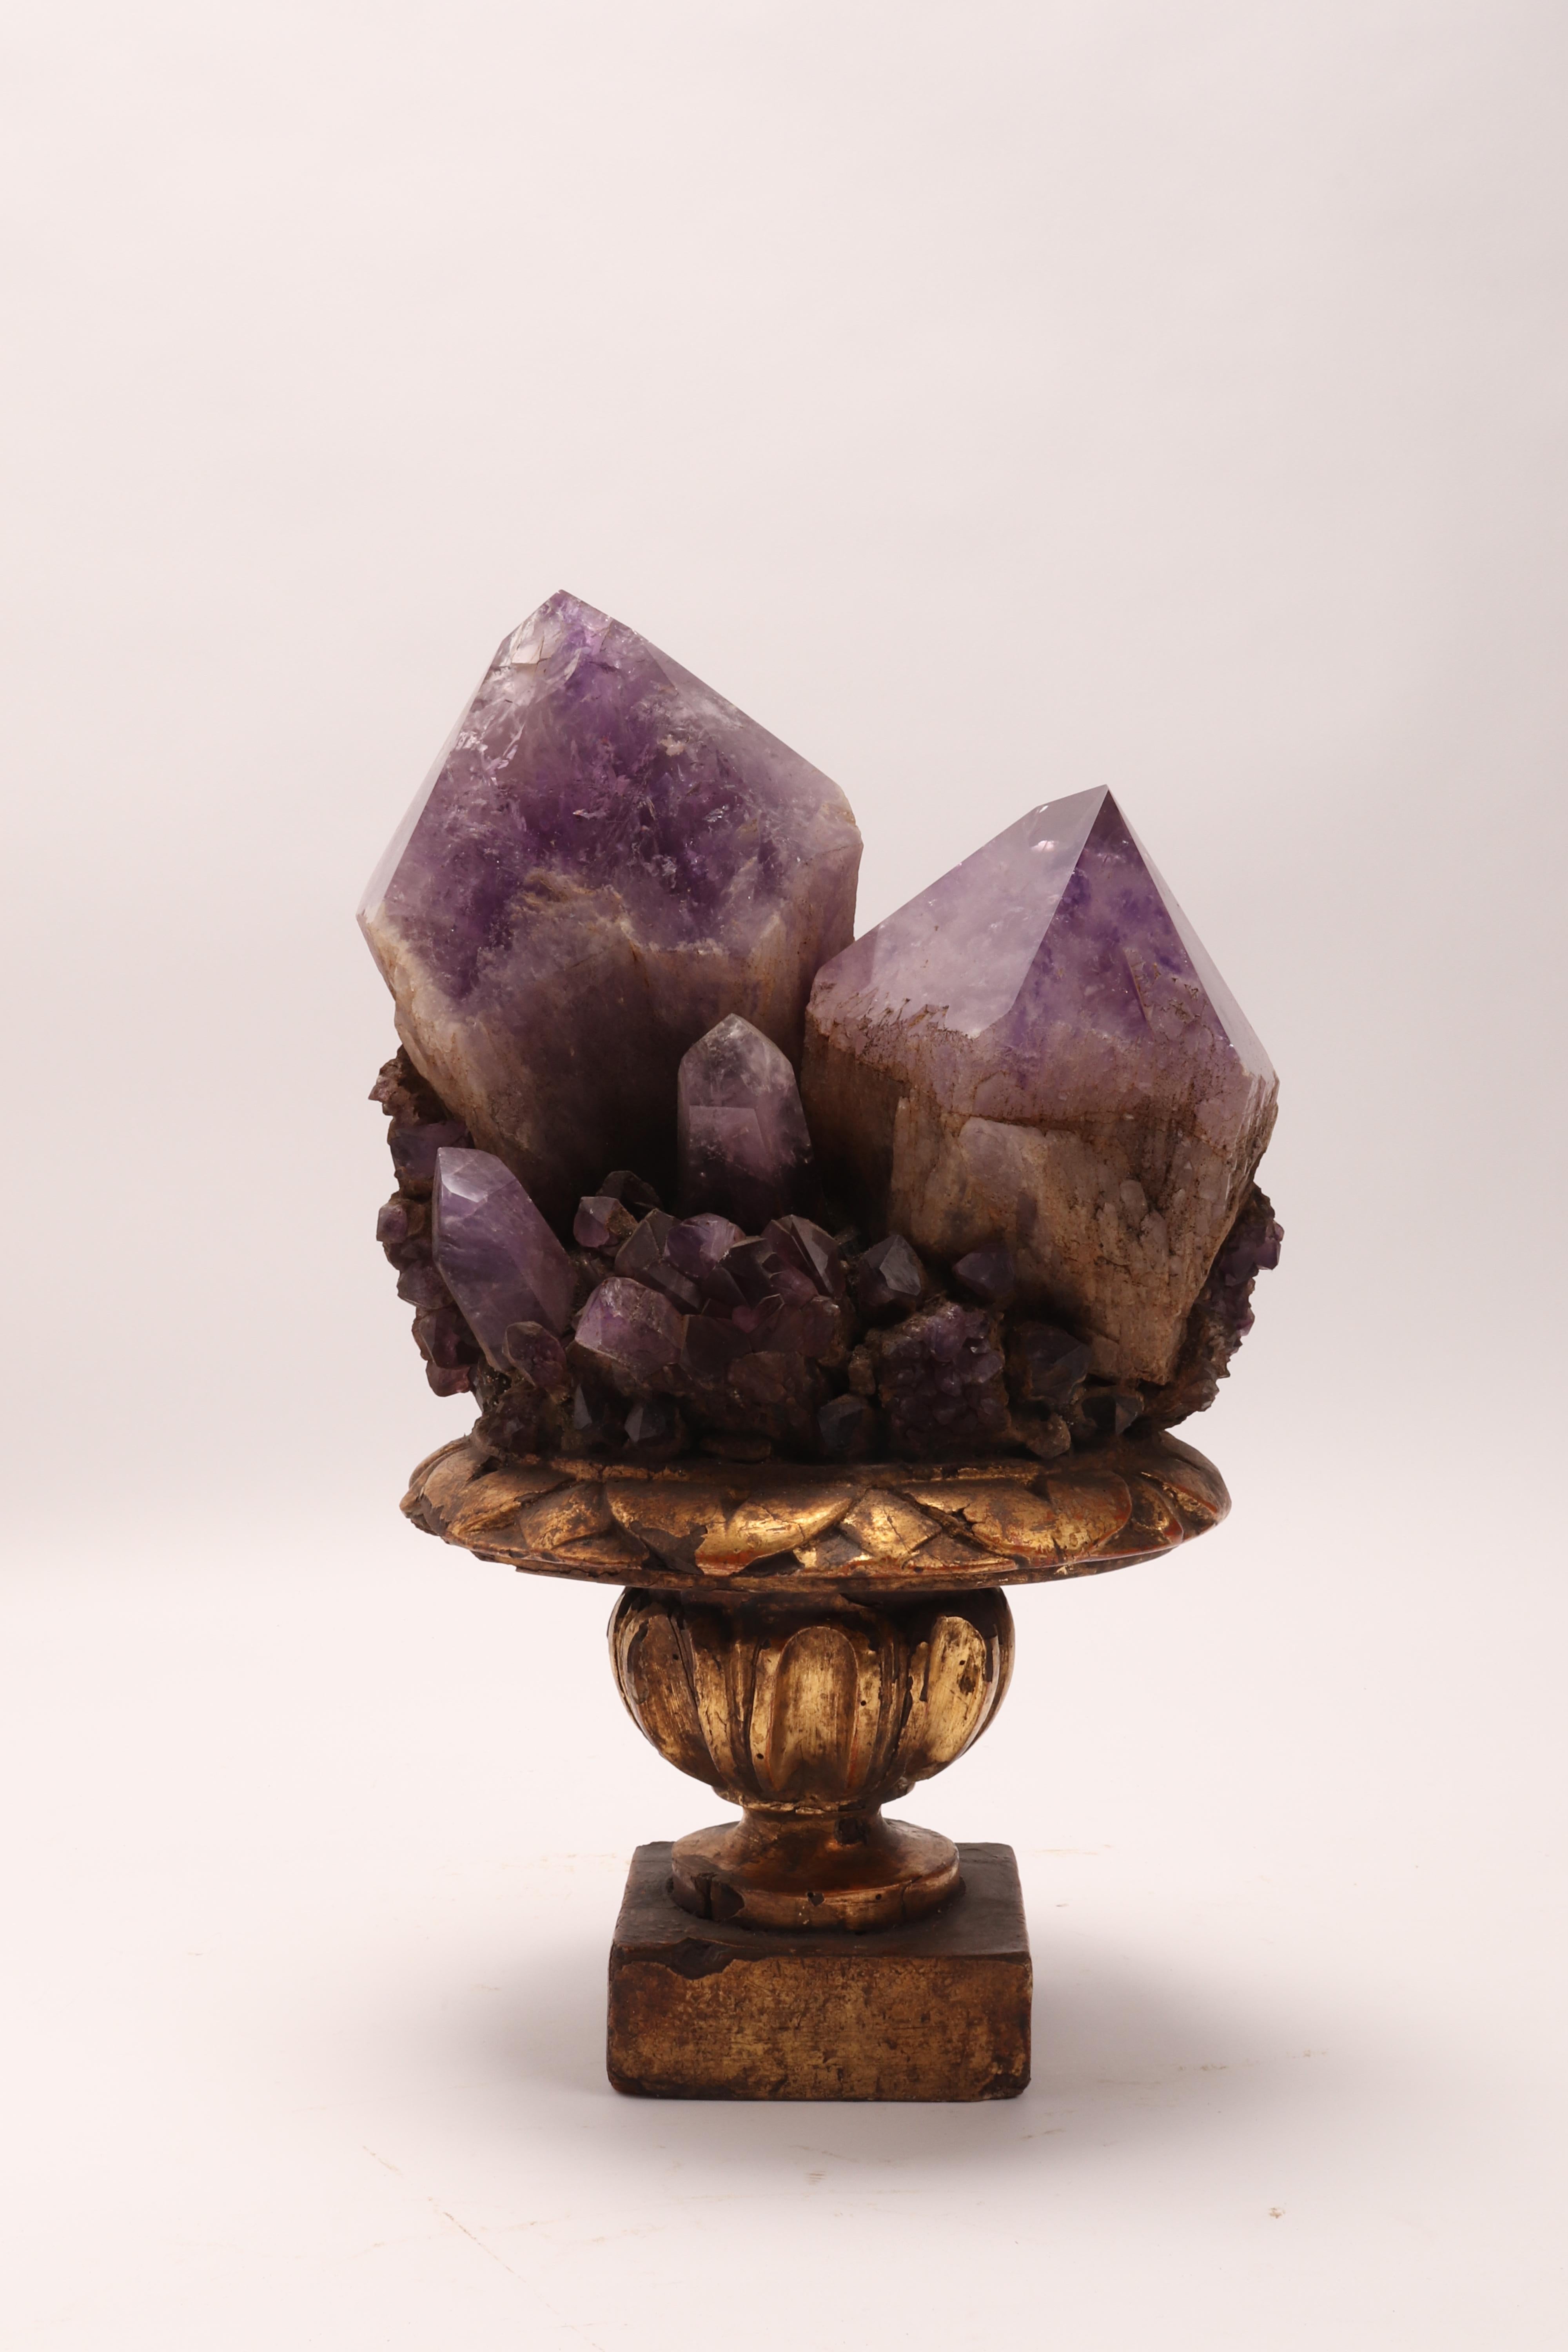 A Naturalia mineral specimen. A pair of big amethyst crystals mounted over a guild-plated wooden base on a vase shape, Italy, circa 1880.